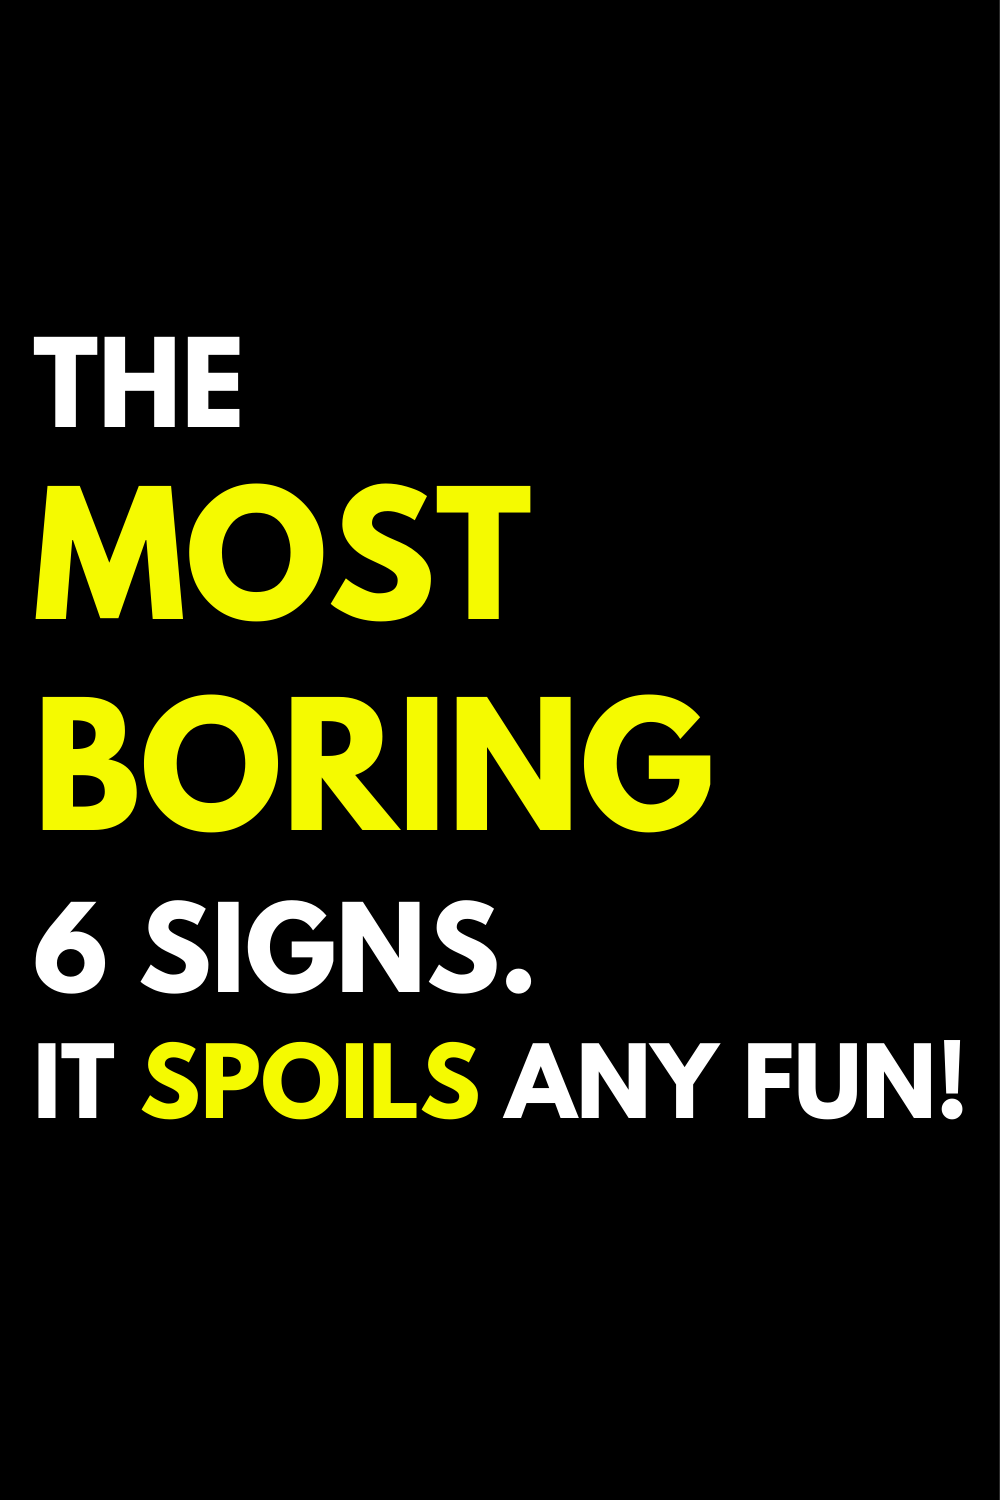 The most boring 6 signs. It spoils any fun!